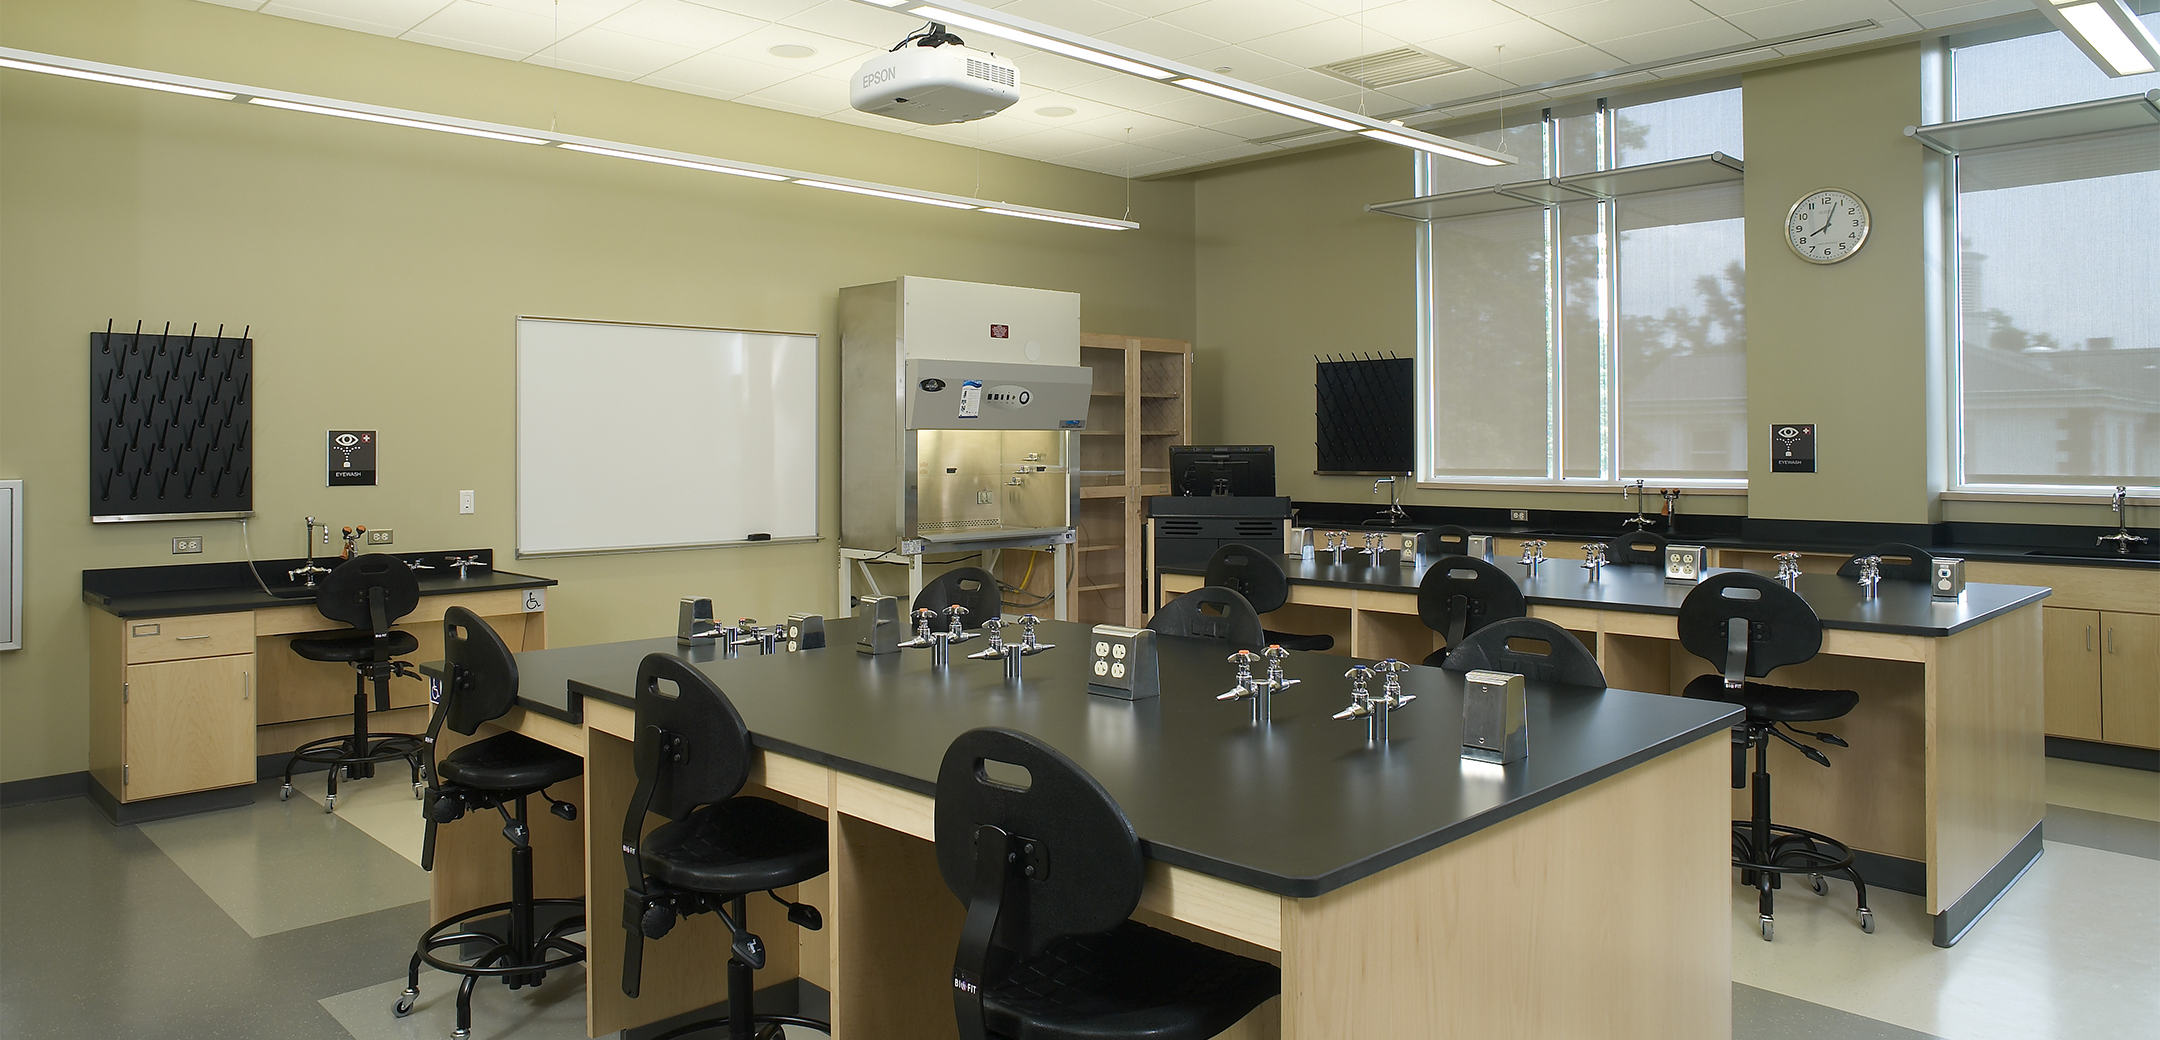 An interior view of the Delaware Valley College science lab, showcasing the large workbenches with built in faucets and a fume hood in the background.